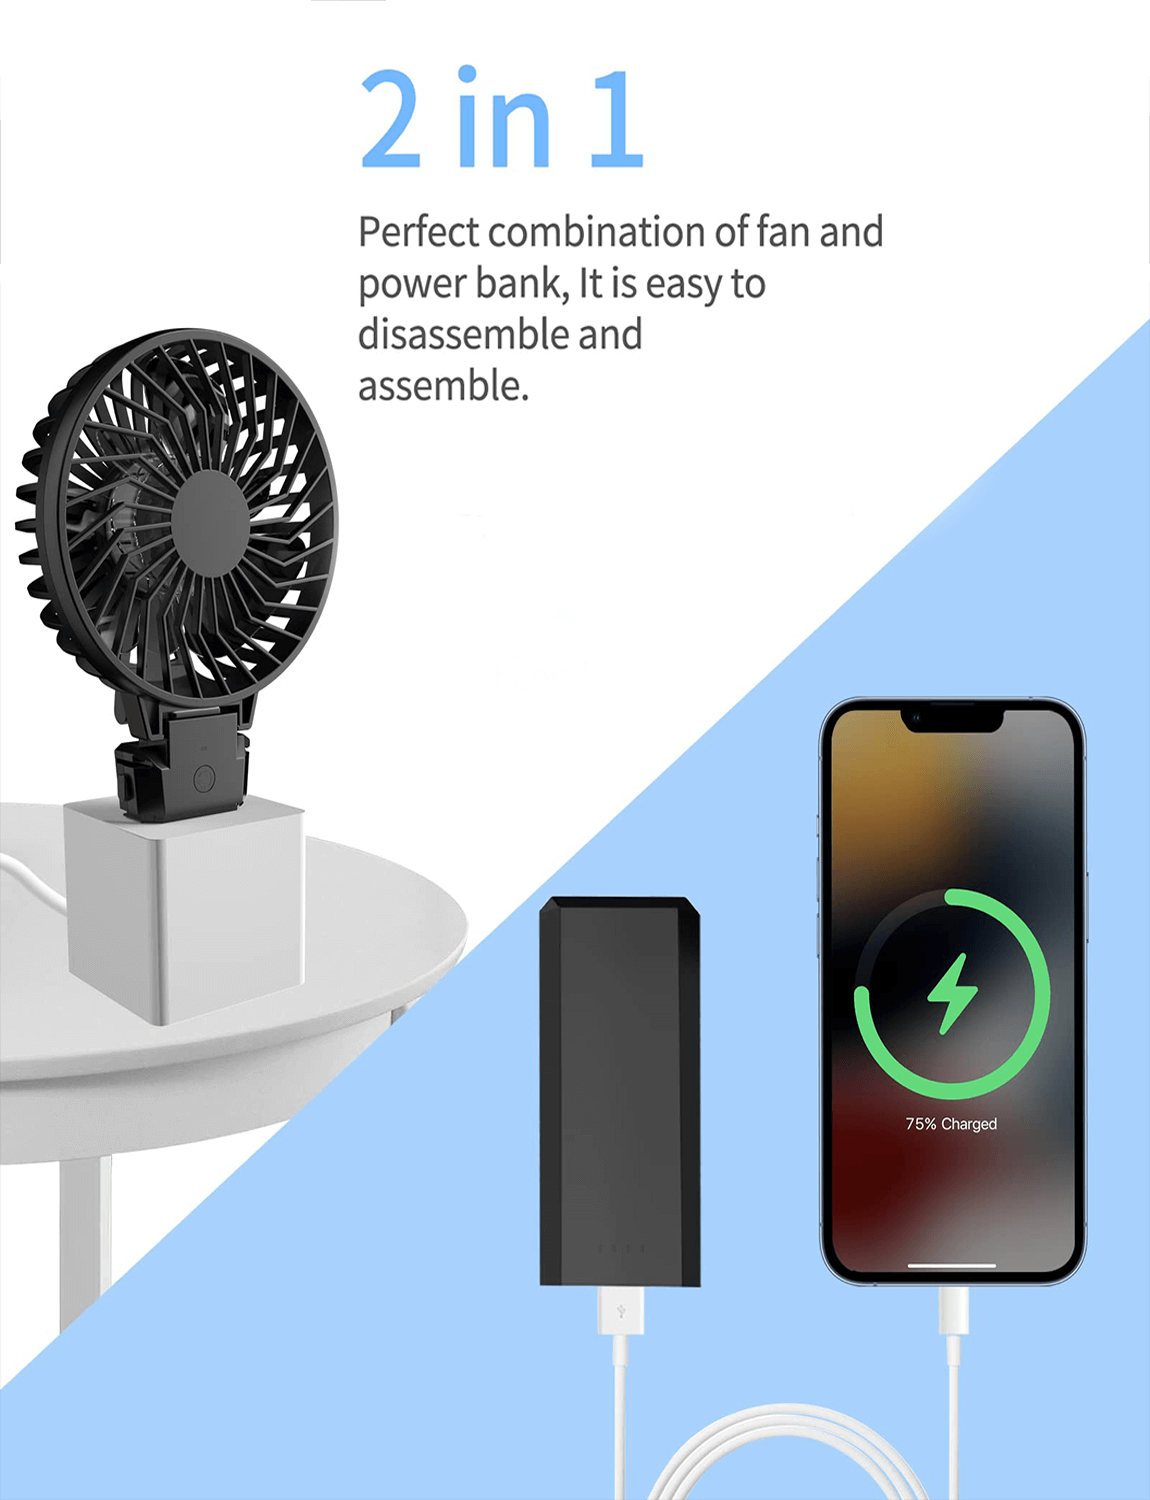 Upgraded power bank with fan